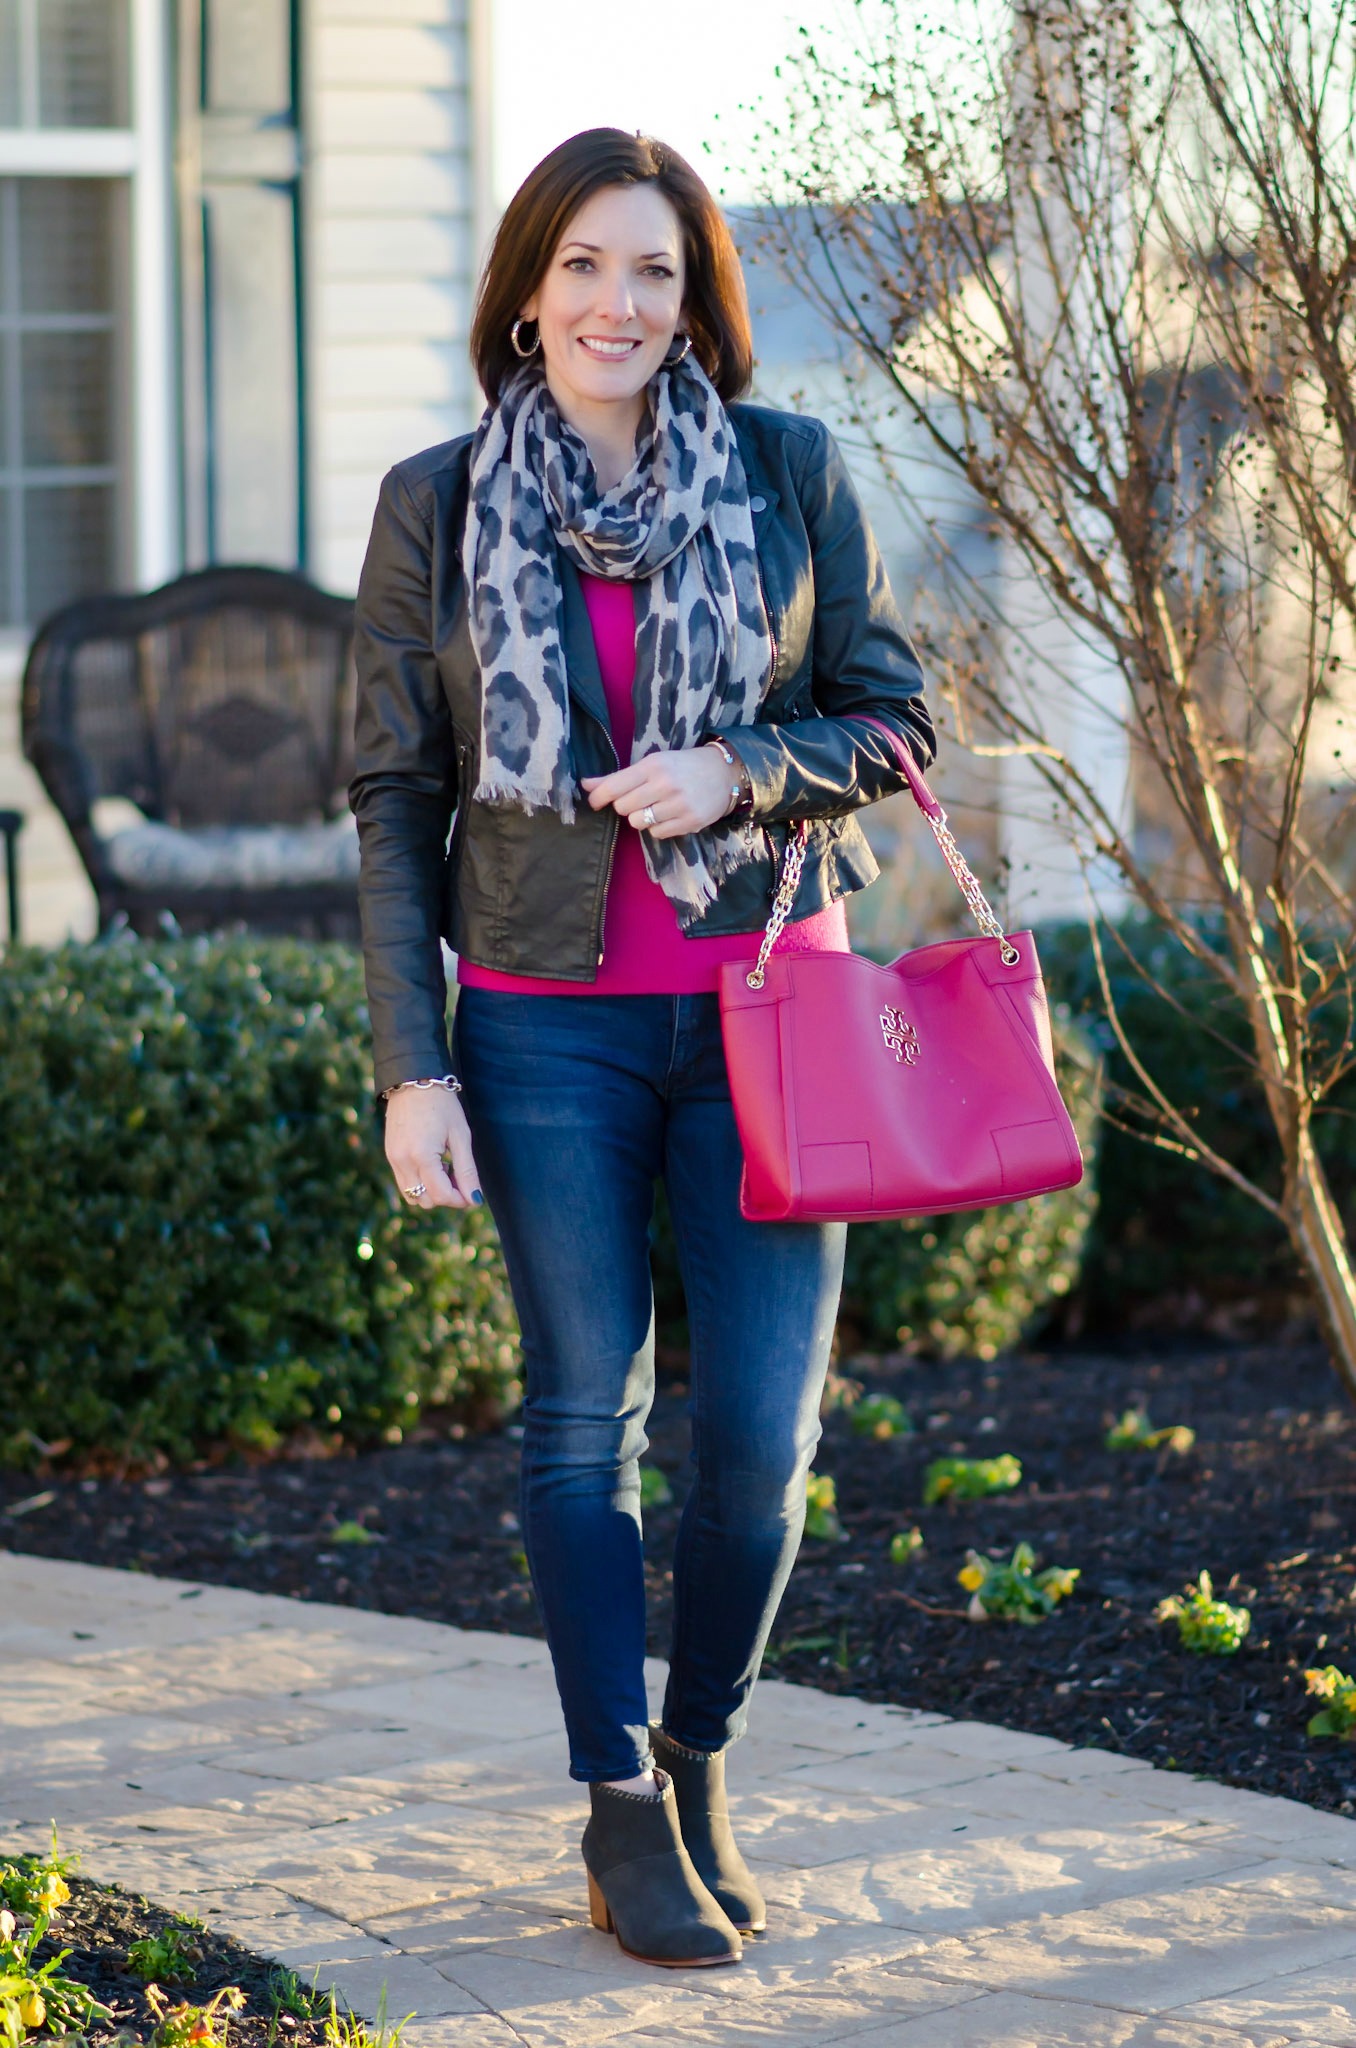 Easy and Chic Outfit Formula for Women Over 40: bright cashmere sweater with skinny jeans, ankle boots and a moto jacket. Throw on a scarf and carry a great bag!